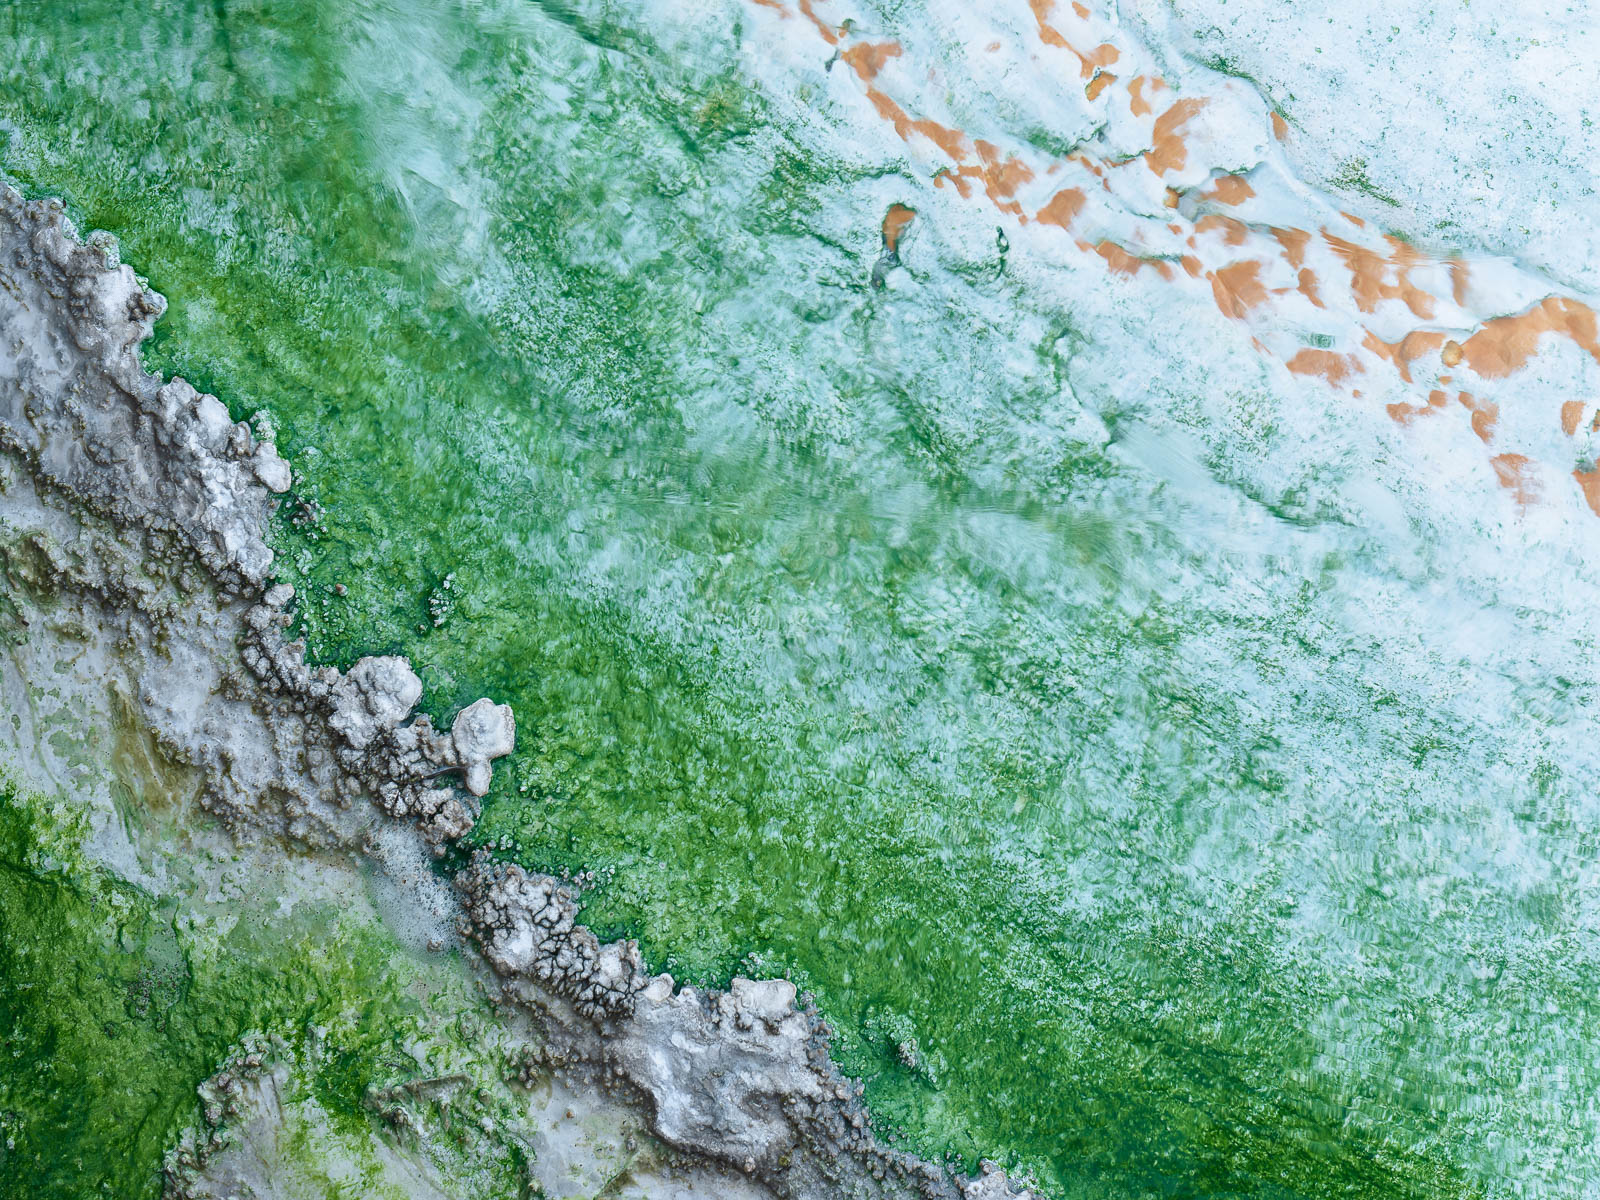 Abstract of a thermal feature in Yellowstone National Park
